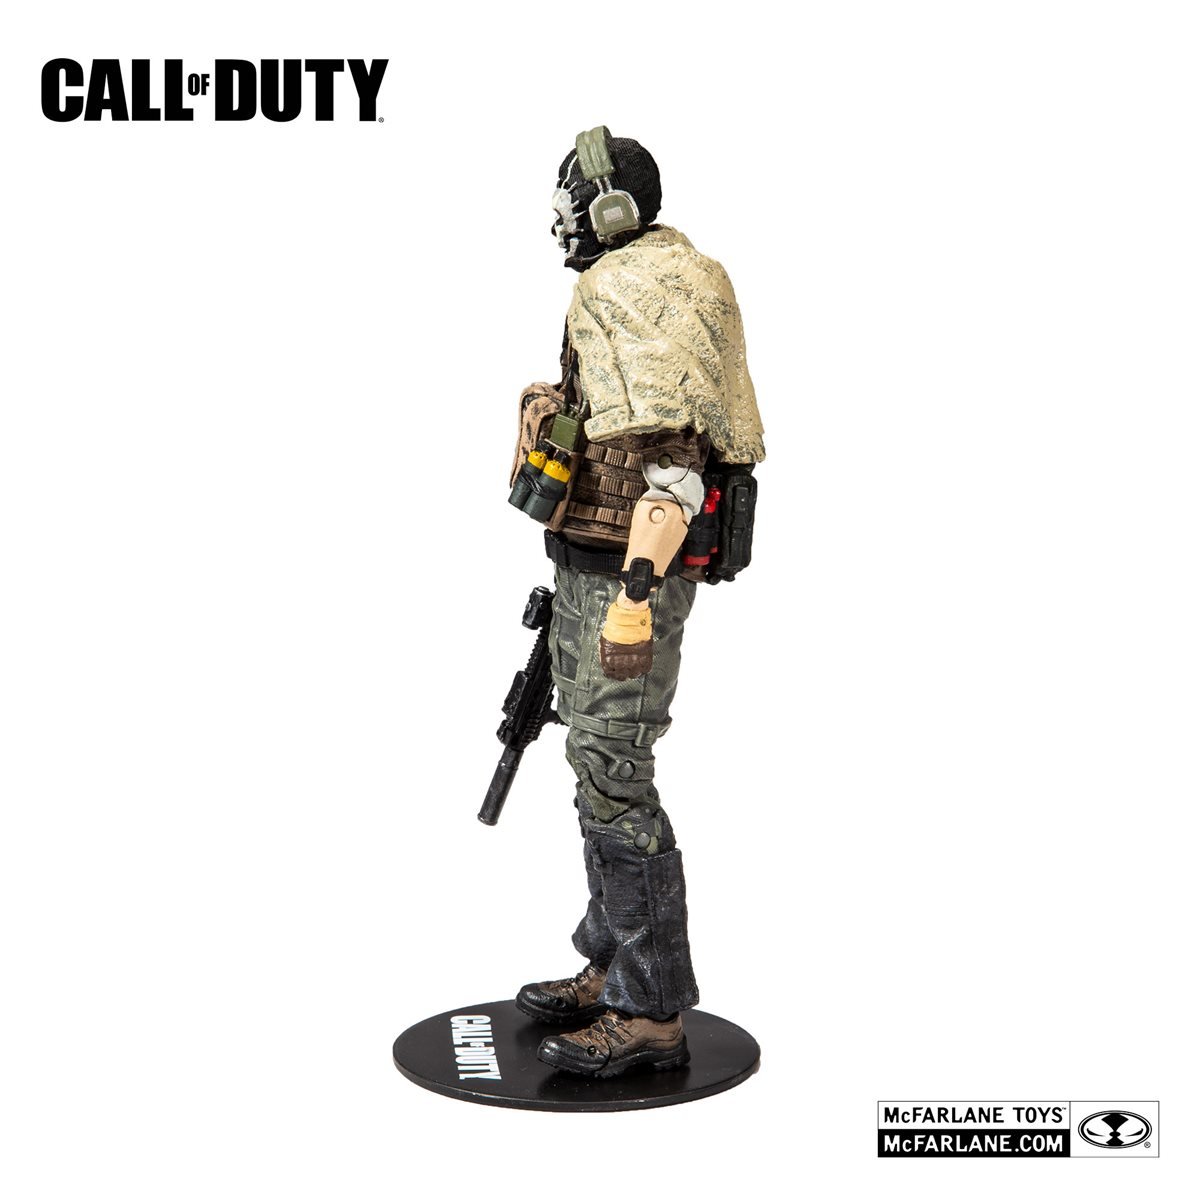 McFarlane Call of Duty Simon Ghost Riley 6 Figure for sale online